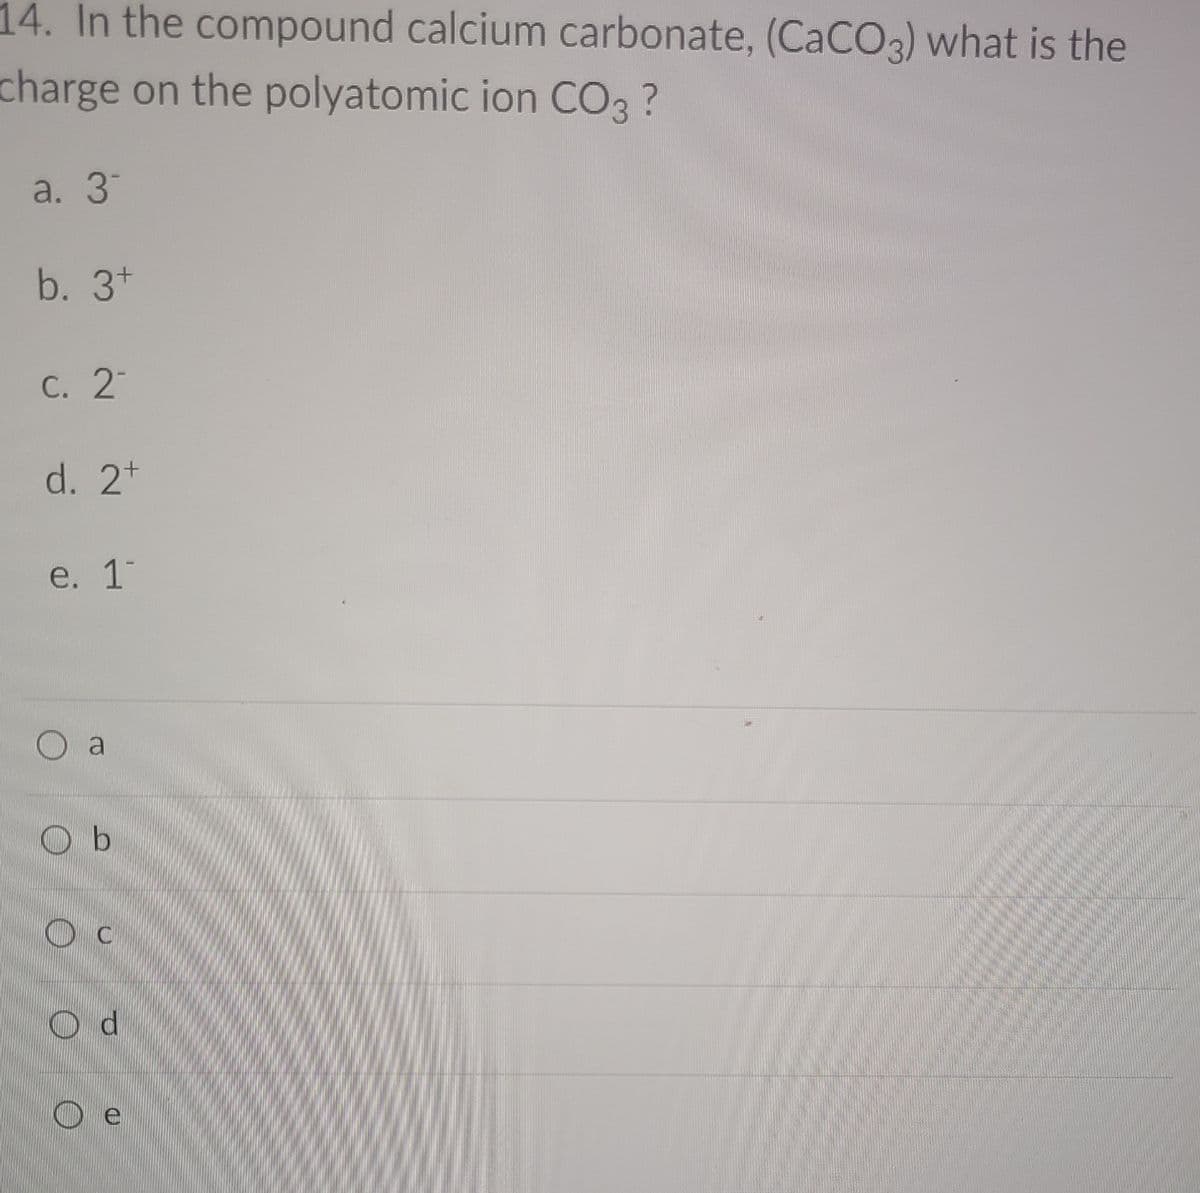 14. In the compound calcium carbonate, (CaCO3) what is the
charge on the polyatomic ion CO3 ?
a. 3
b. 3*
С. 2
d. 2t
e. 1
O a
O b
O e
